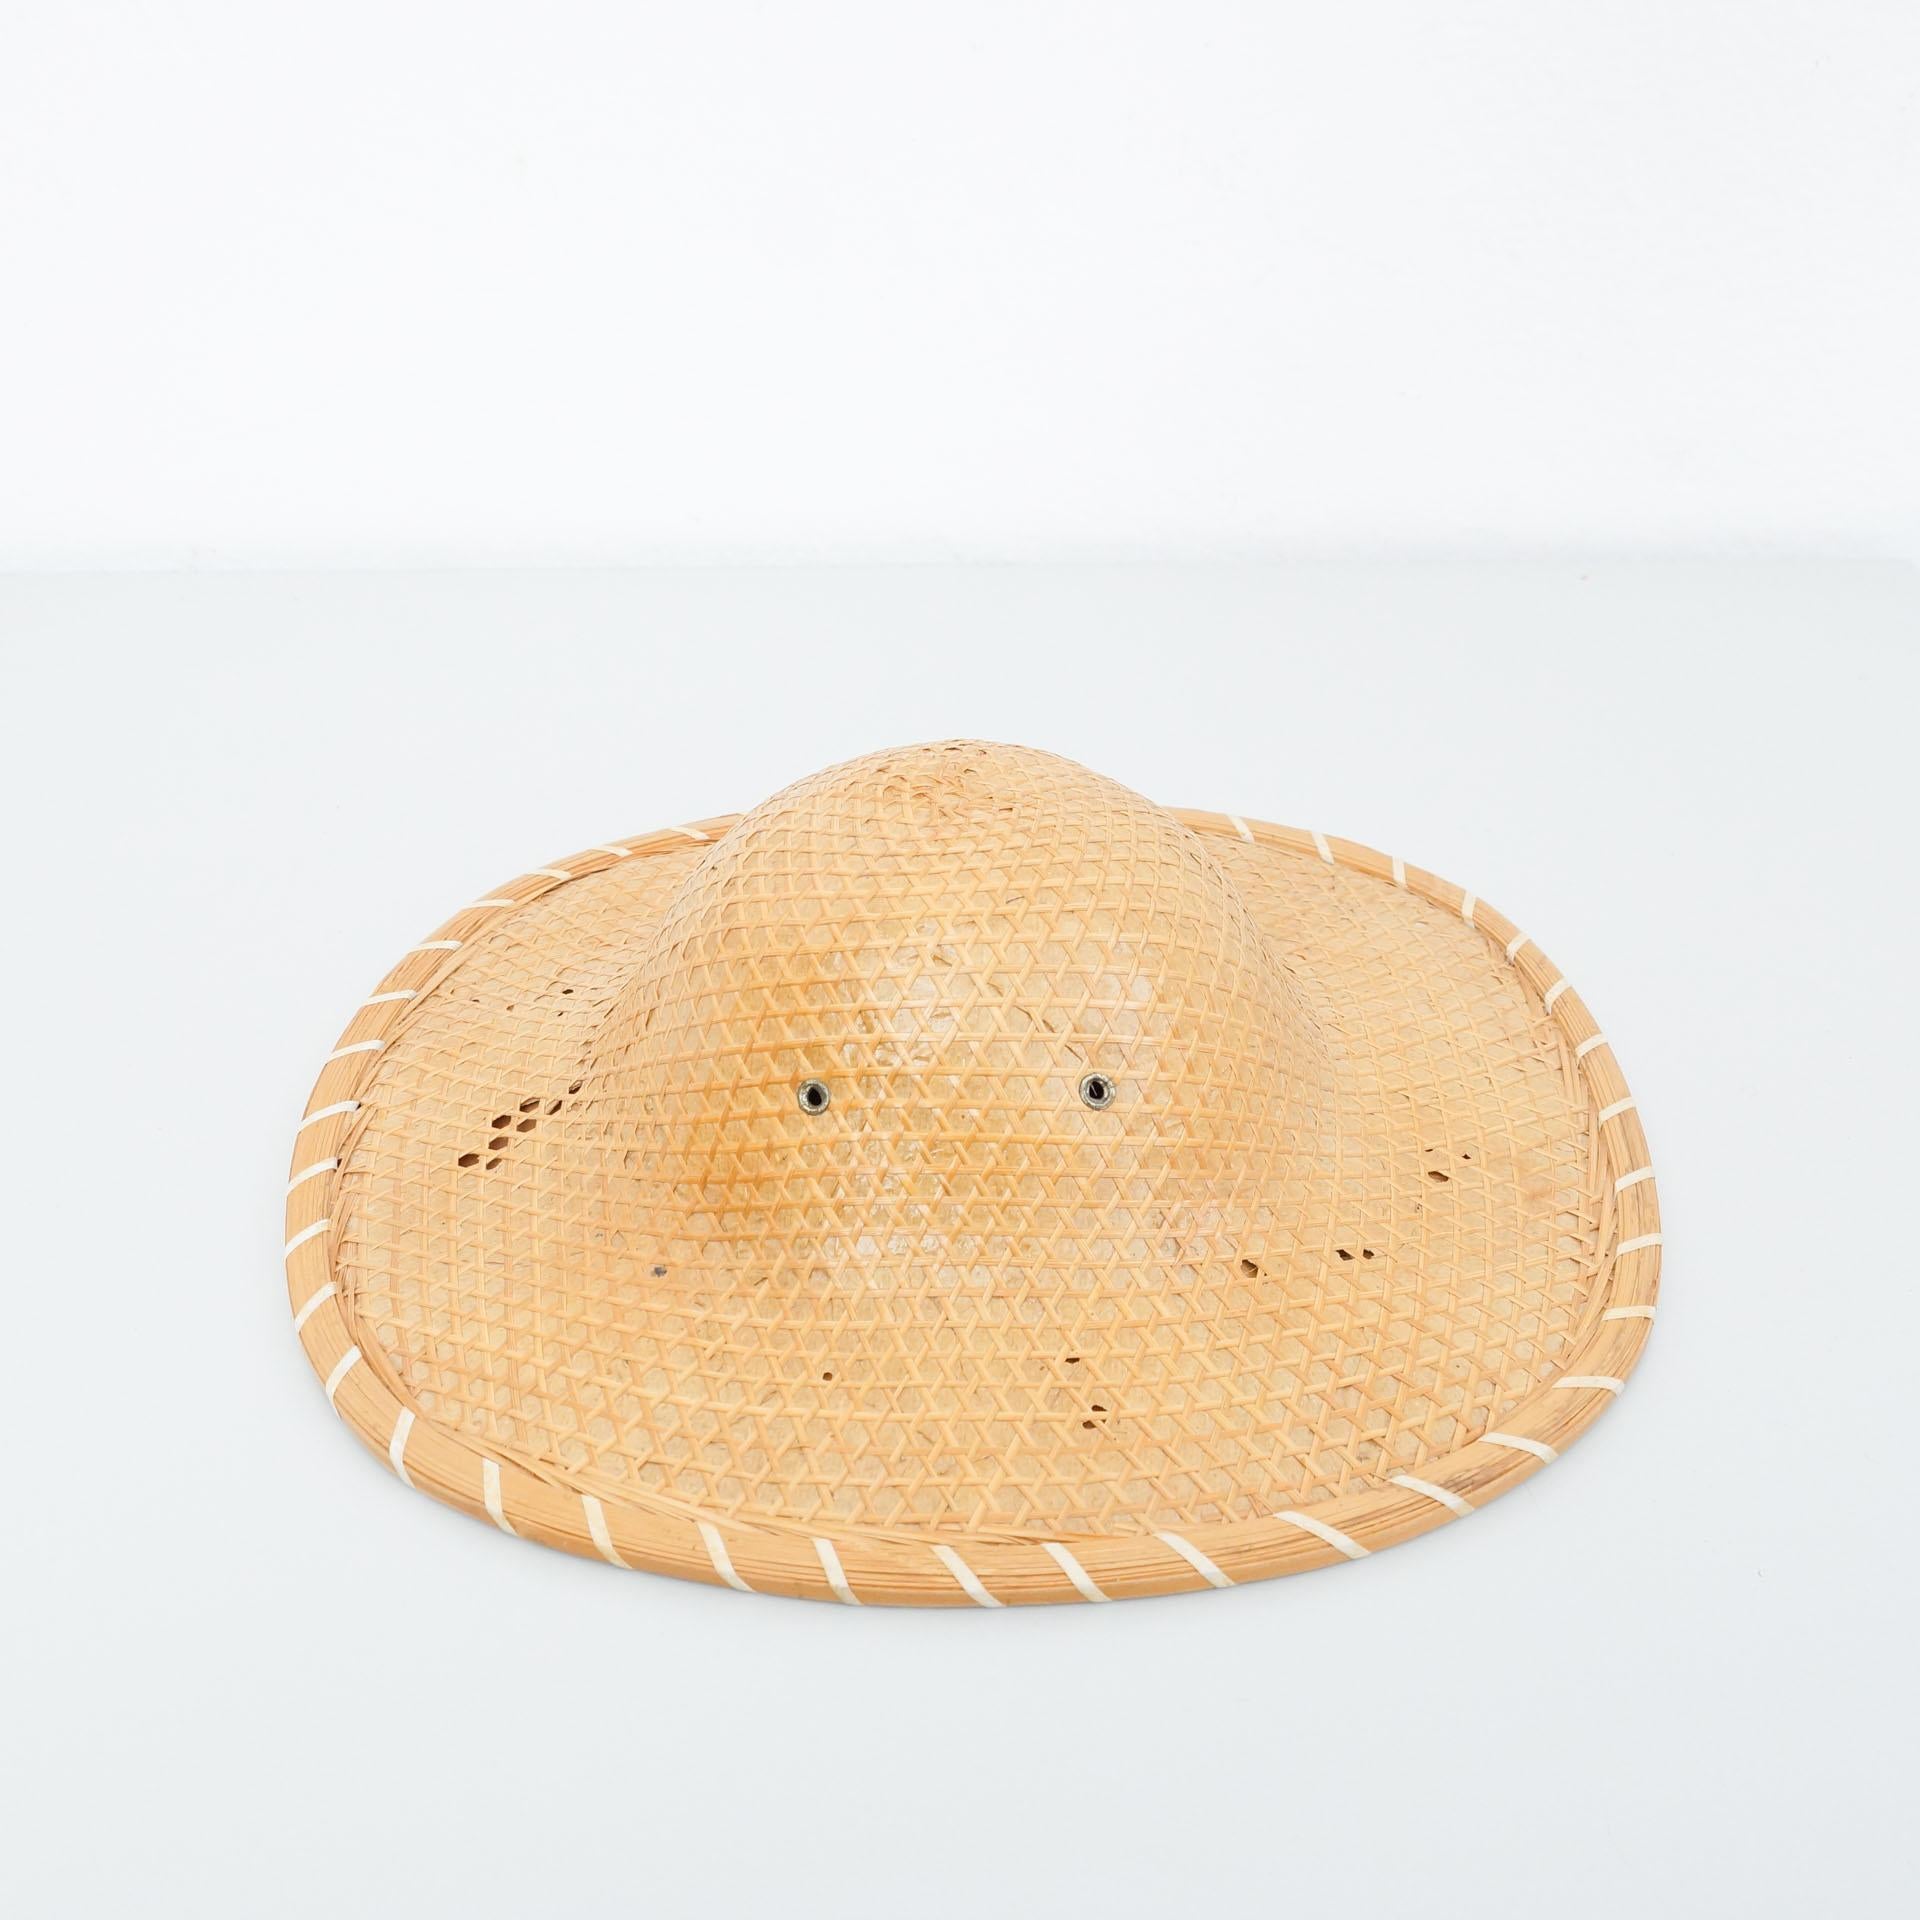 Asian hat, circa 1950.
By unknown manufacturer, from Asia.

In original condition, with some visible signs of previous use and age, preserving a beautiful patina.

Materials:
Rattan

